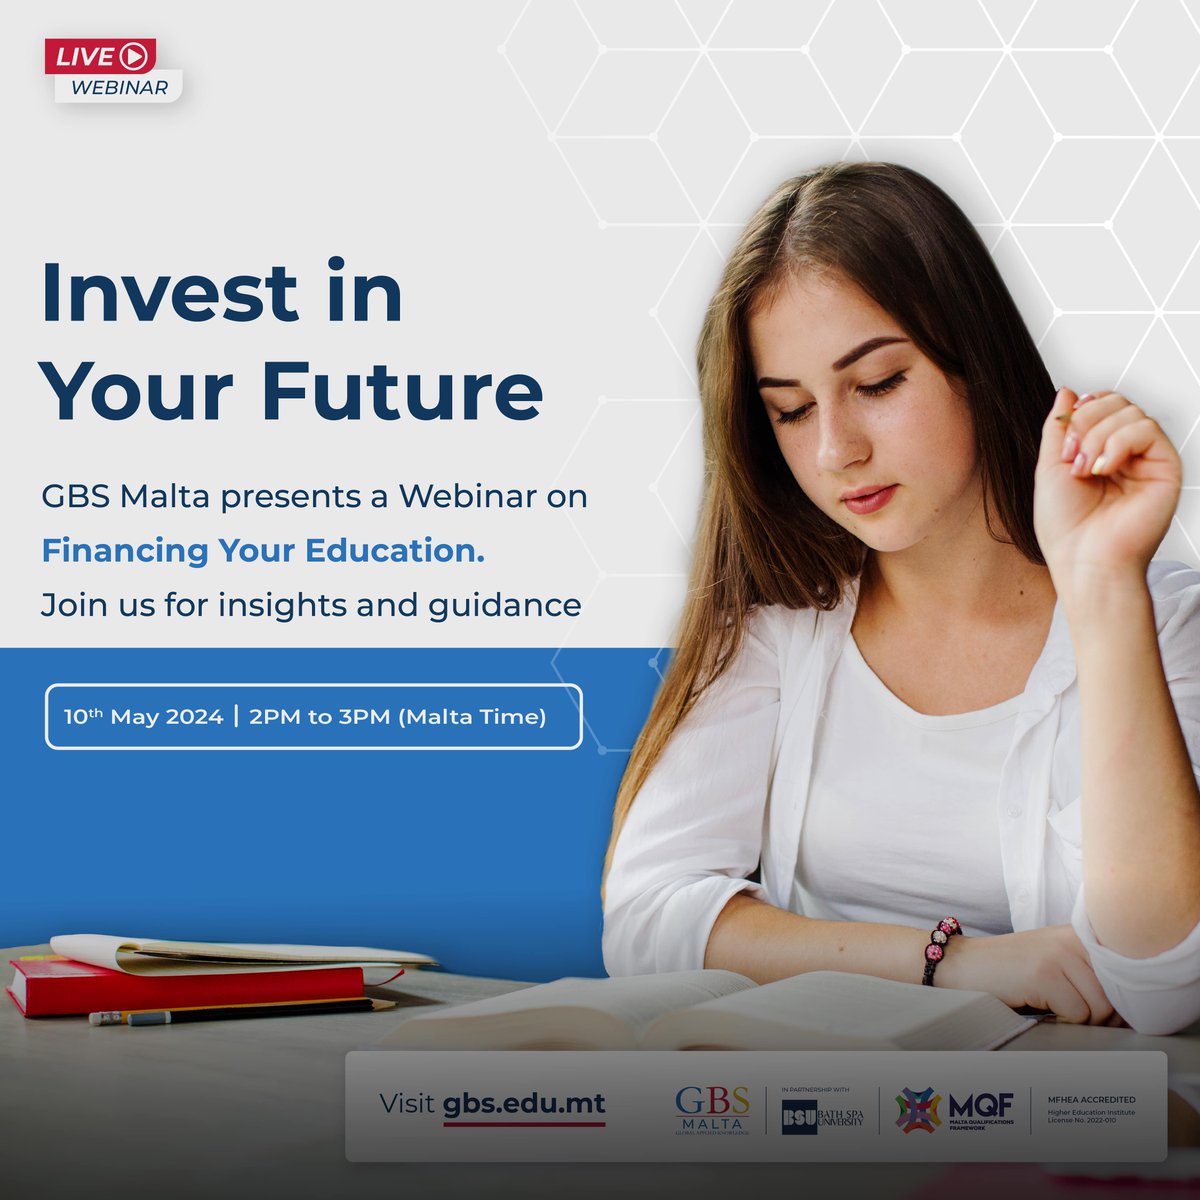 Join us for our webinar on Financing Your Education on May 10th, 2024, from 5:30 pm to 6:30 pm (IST).

Don't miss this opportunity to learn how to make your academic dreams a reality!
 
Register Now: bit.ly/4b5jE67

#GBSMalta #FinancingEducation #StudyinMalta